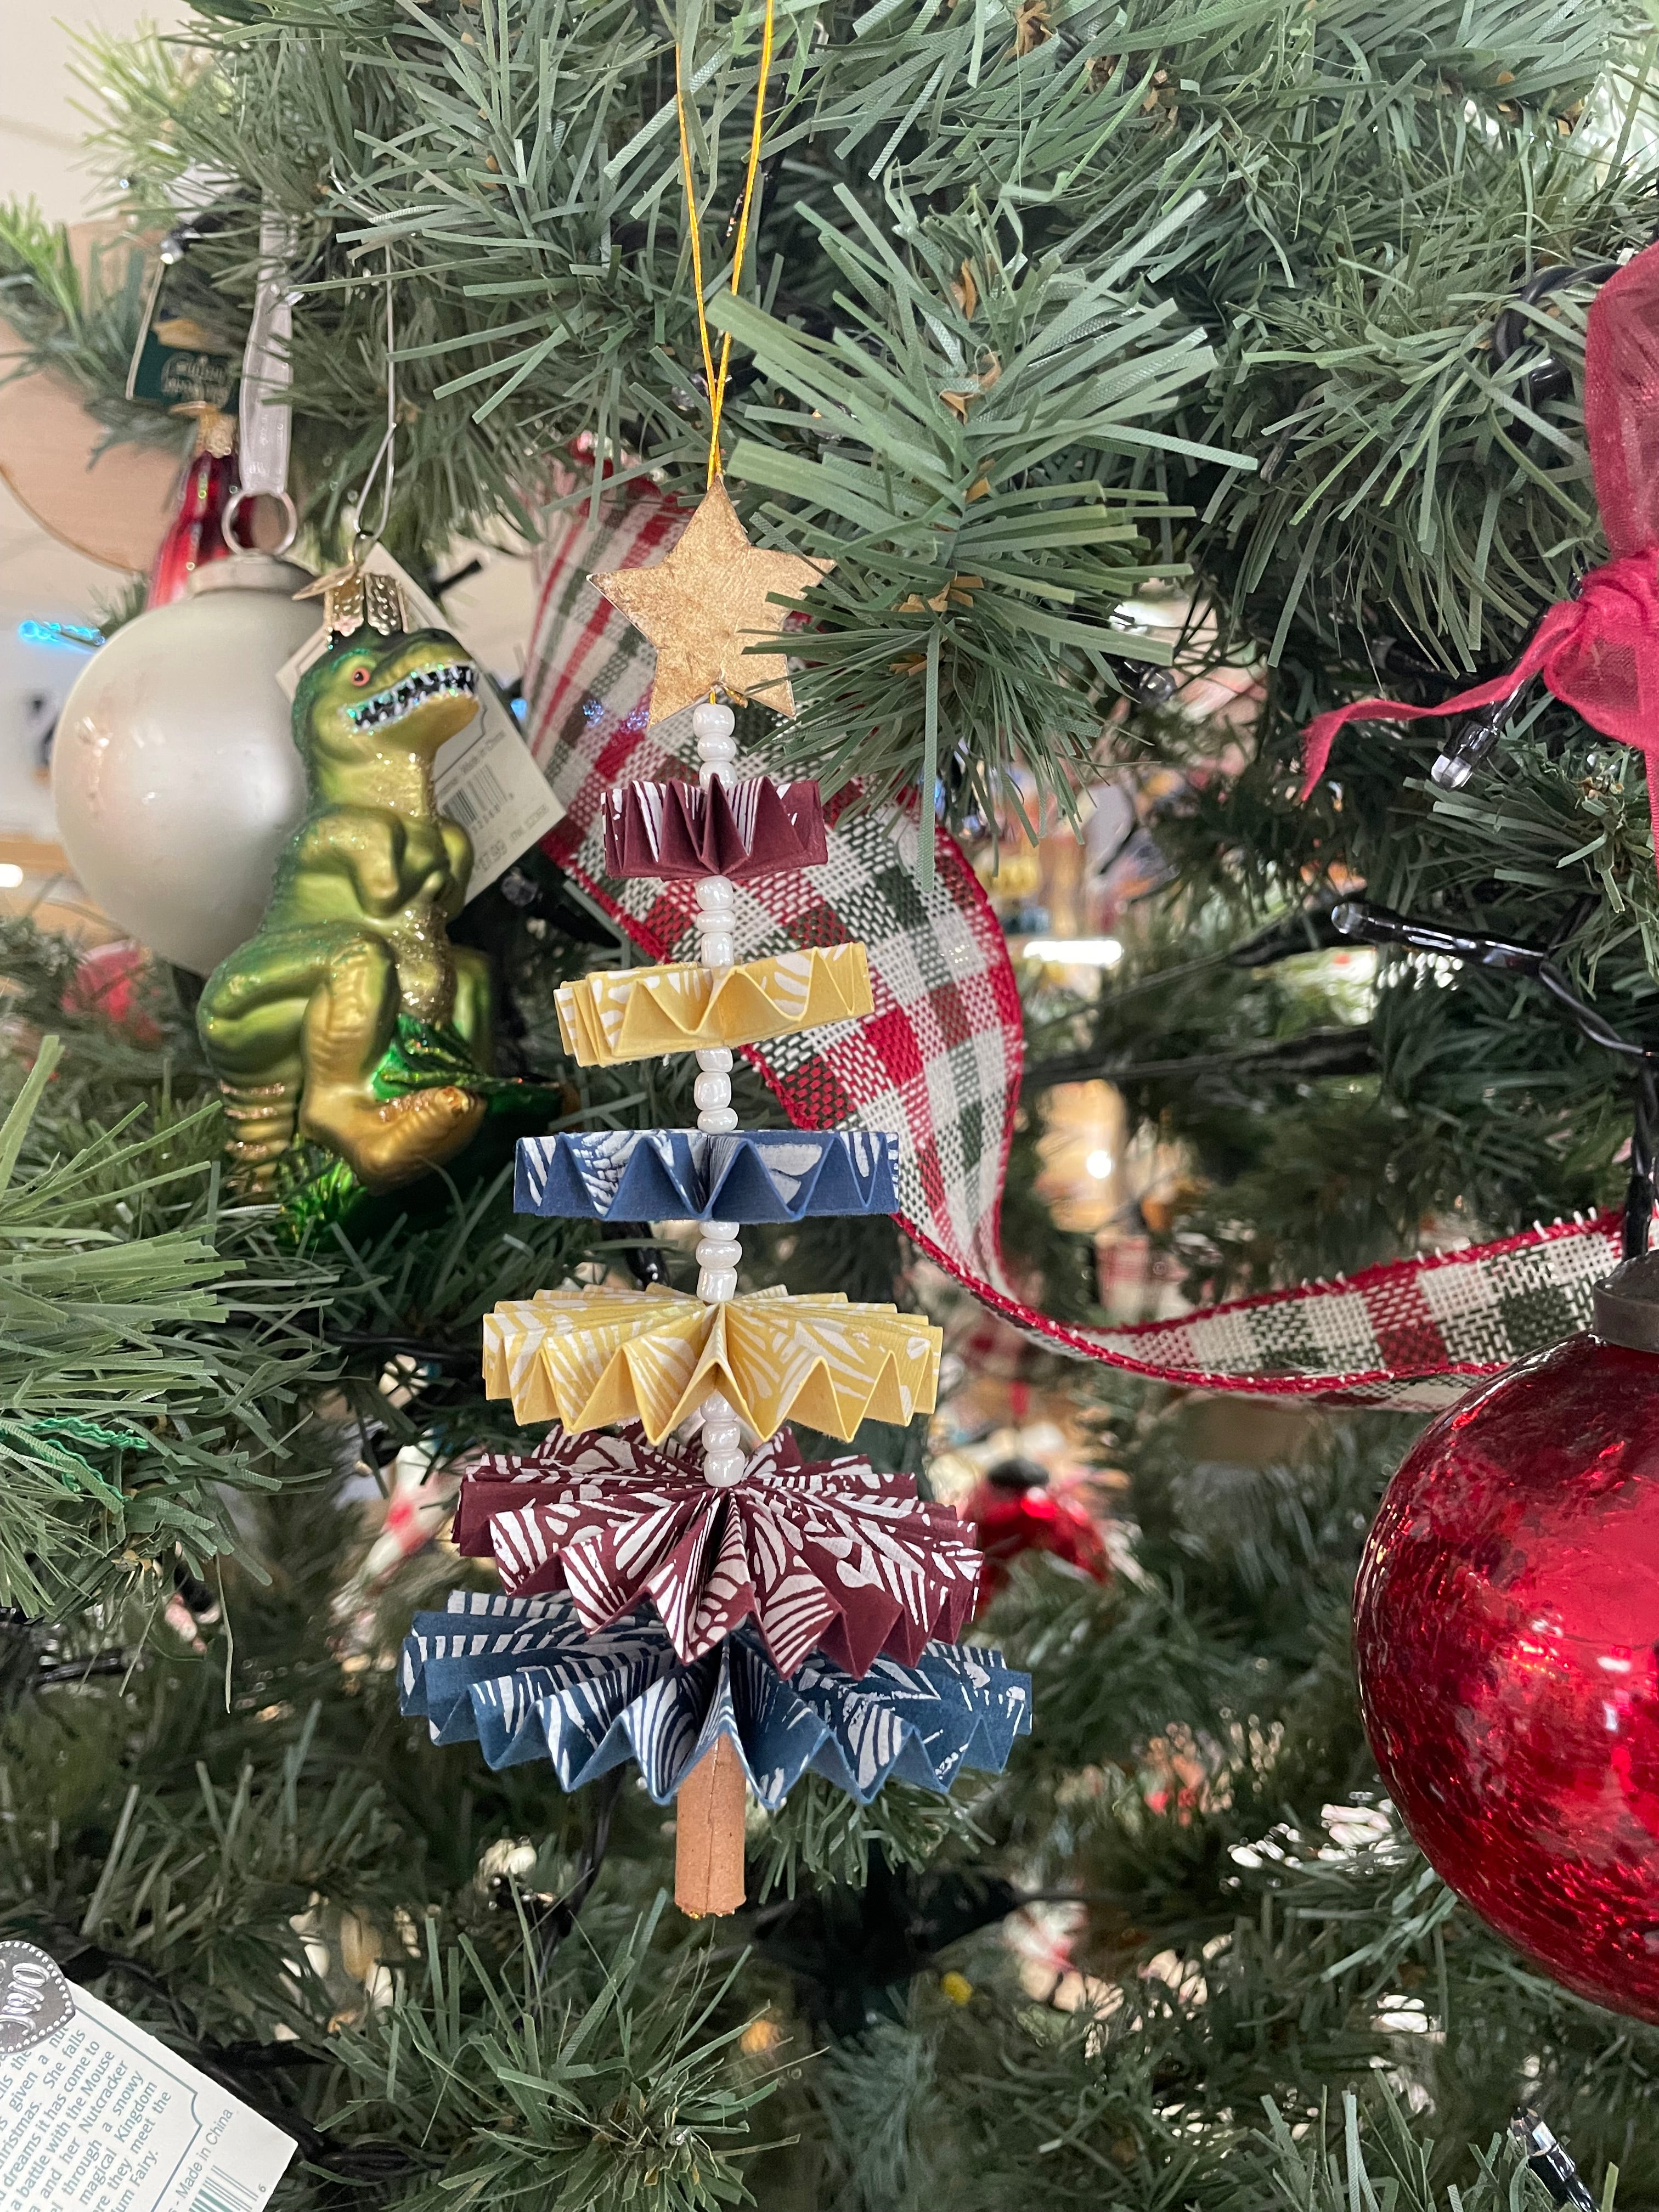 Christmas Tree - Fanfold Paper Tree Ornament